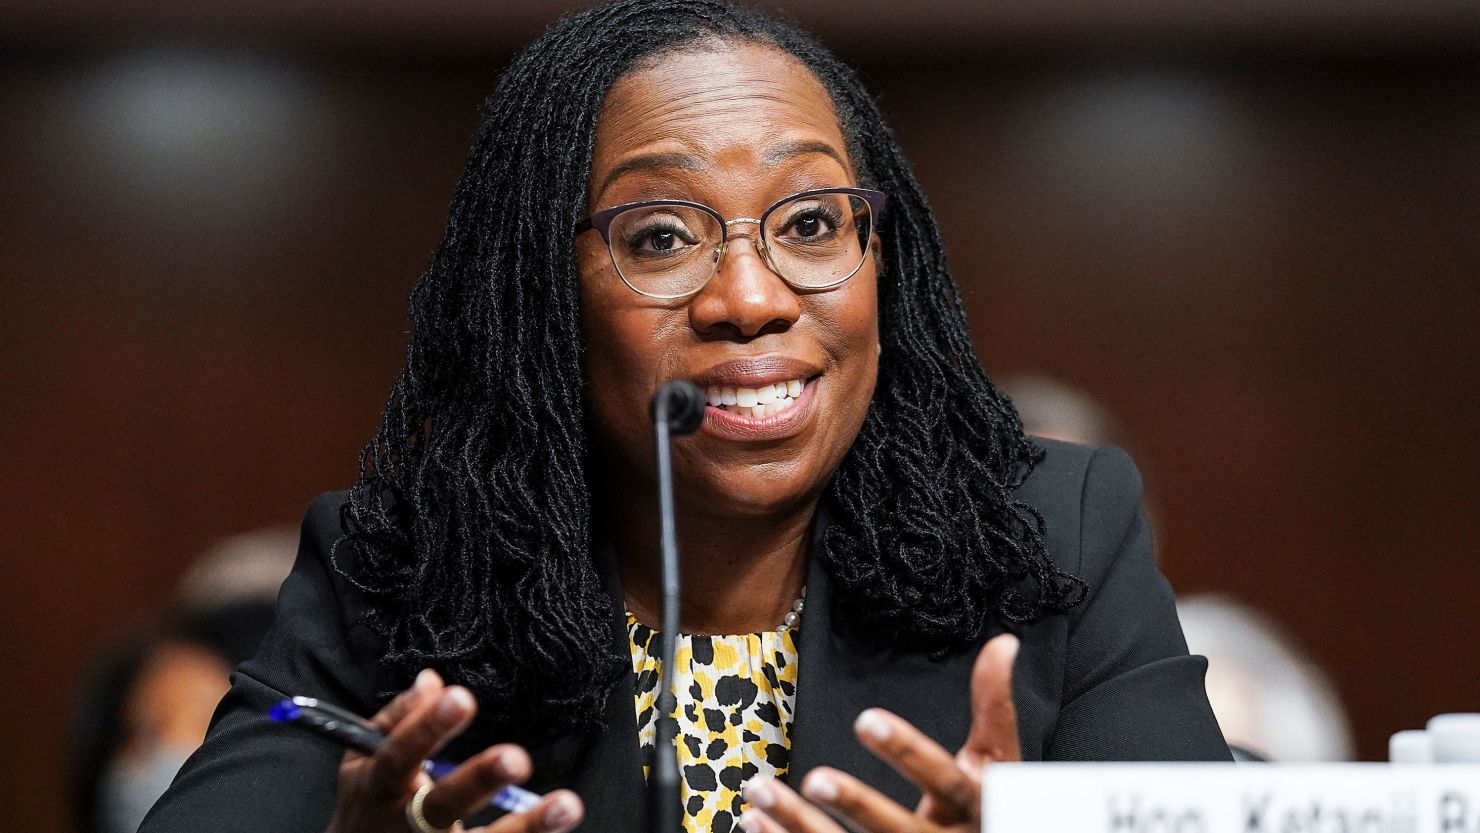 Ketanji Brown Jackson, nominated to be a US Circuit Judge for the District of Columbia Circuit, testifies before a Senate Judiciary Committee hearing on pending judicial nominations on Capitol Hill in Washington, DC, on April 28, 2021.